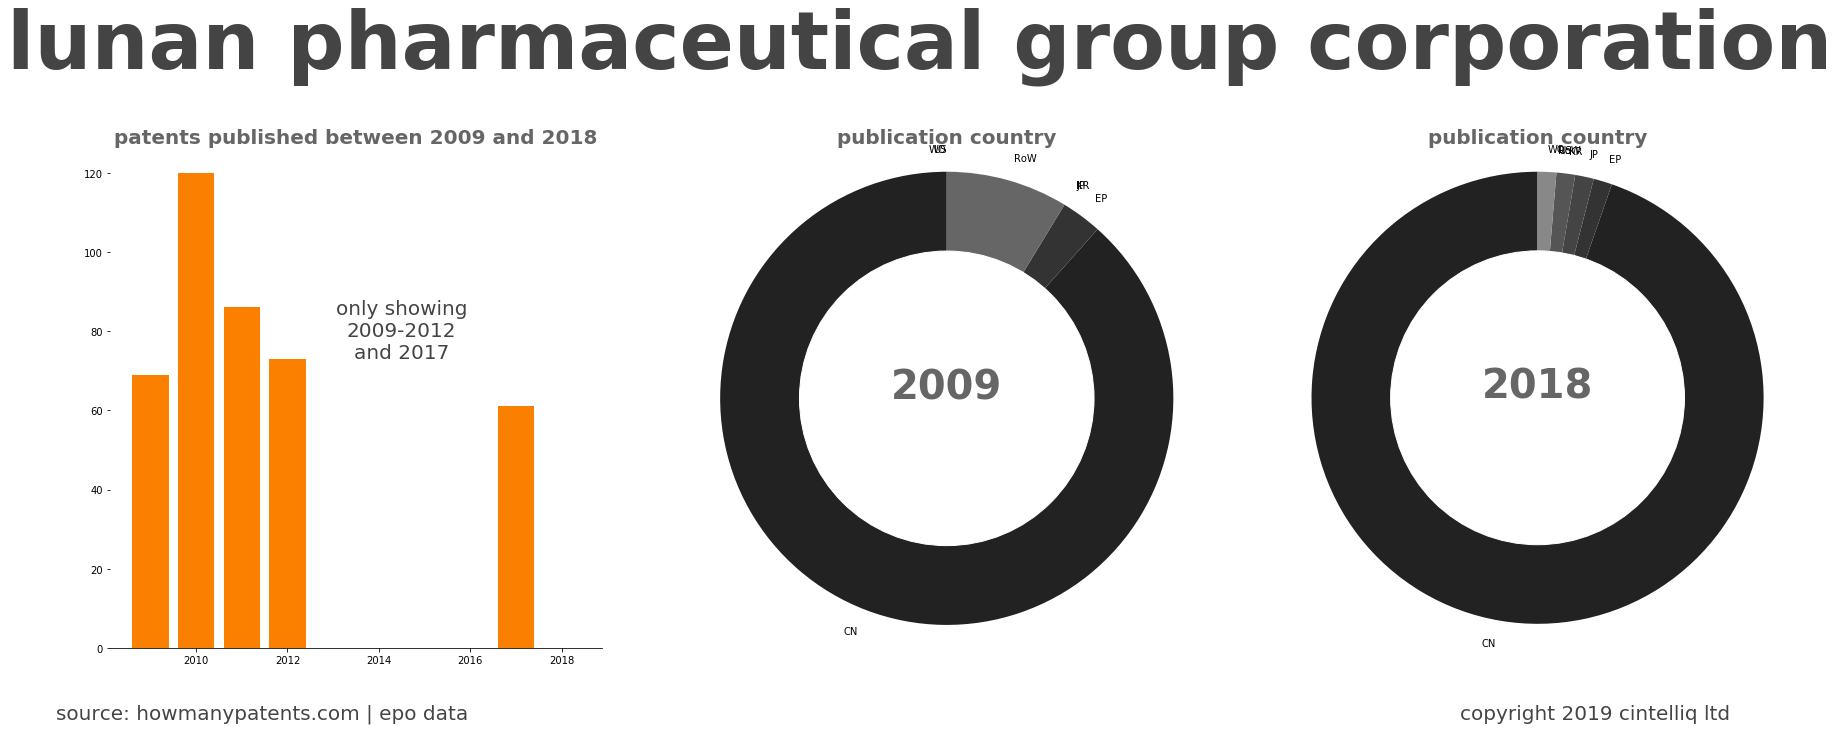 summary of patents for Lunan Pharmaceutical Group Corporation